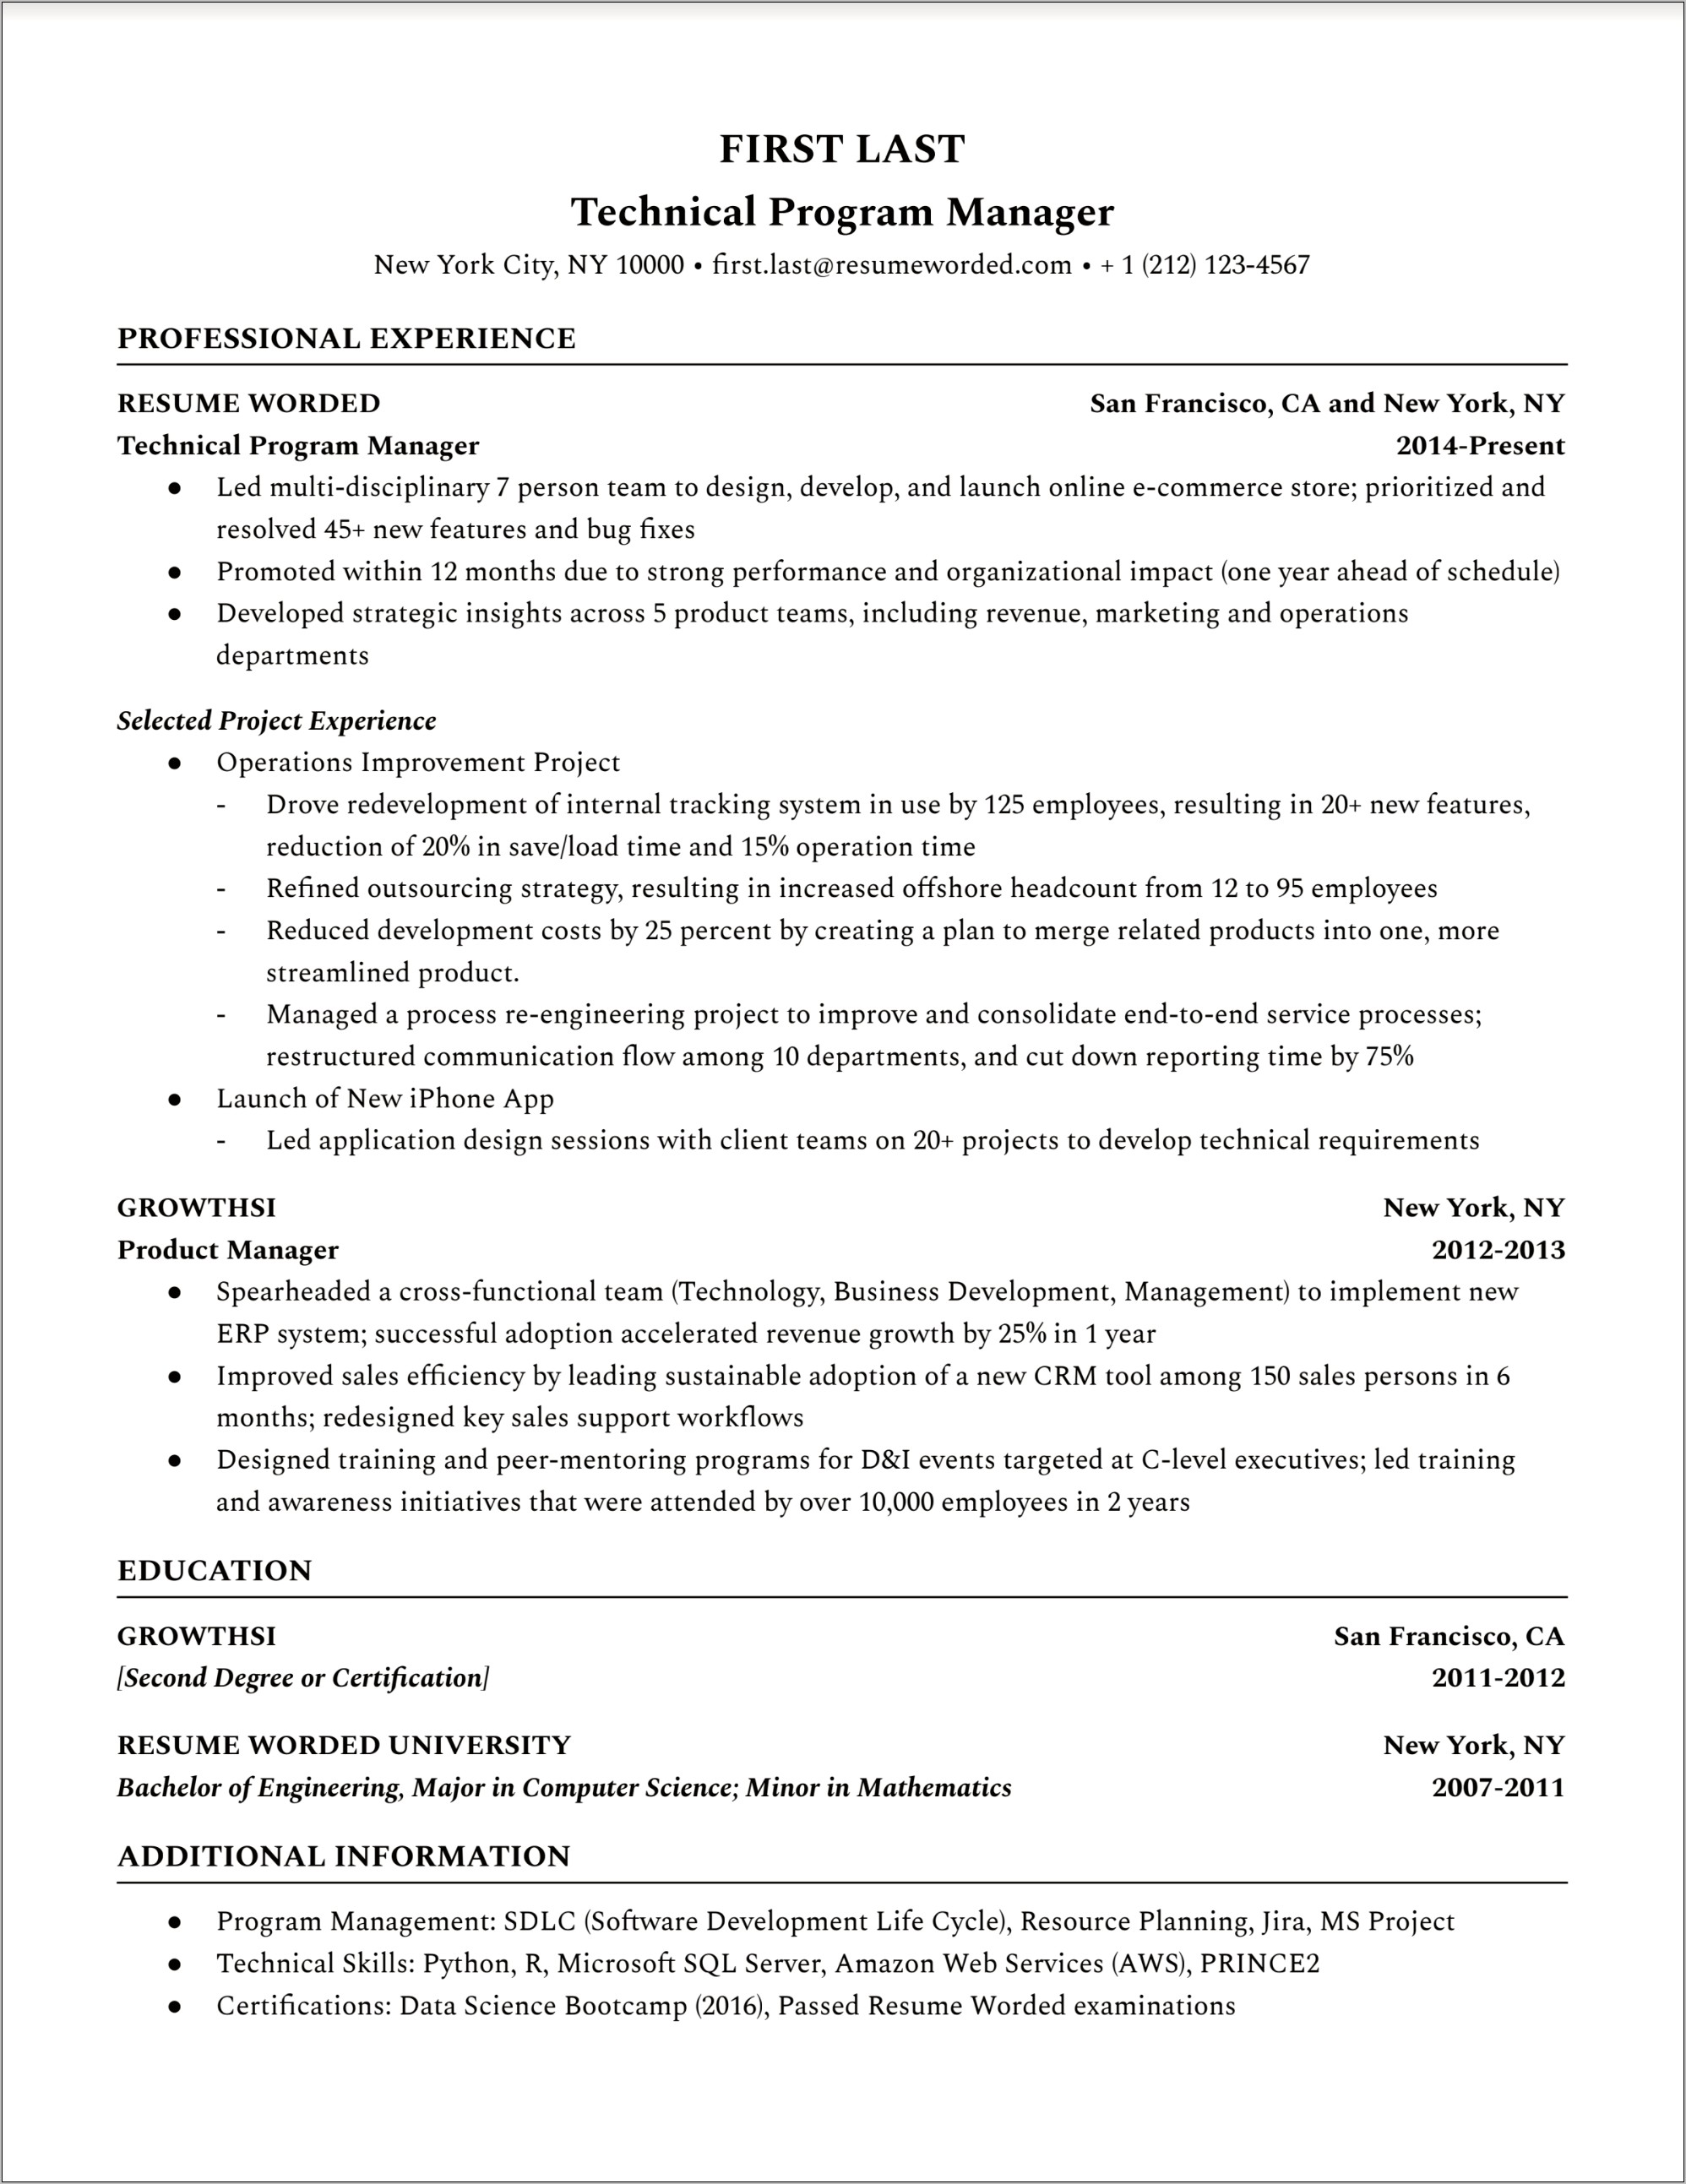 Professional Resume For A Program Manager